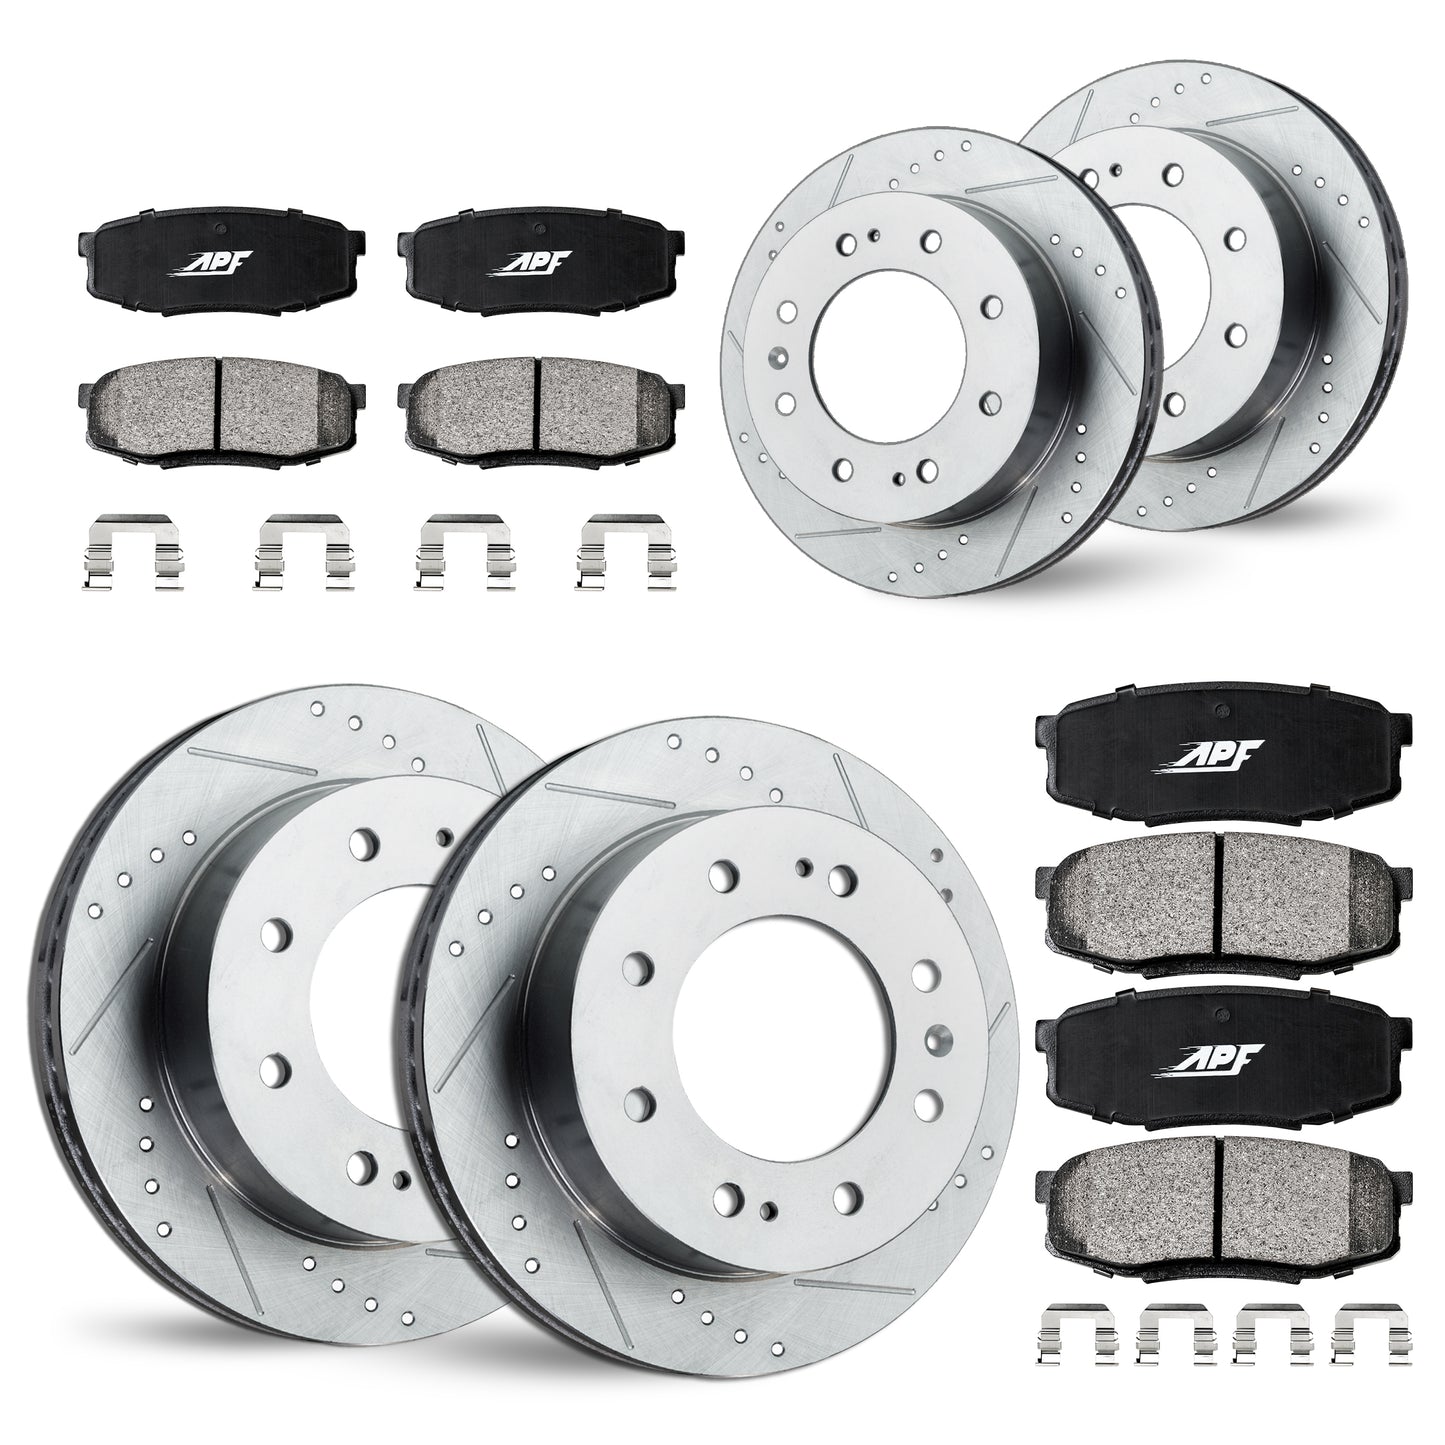 APF Full Kit compatible with Chevrolet Silverado 2500 HD 2007 | Zinc Drilled Slotted Rotors with Ceramic Carbon Fiber Brake Pads